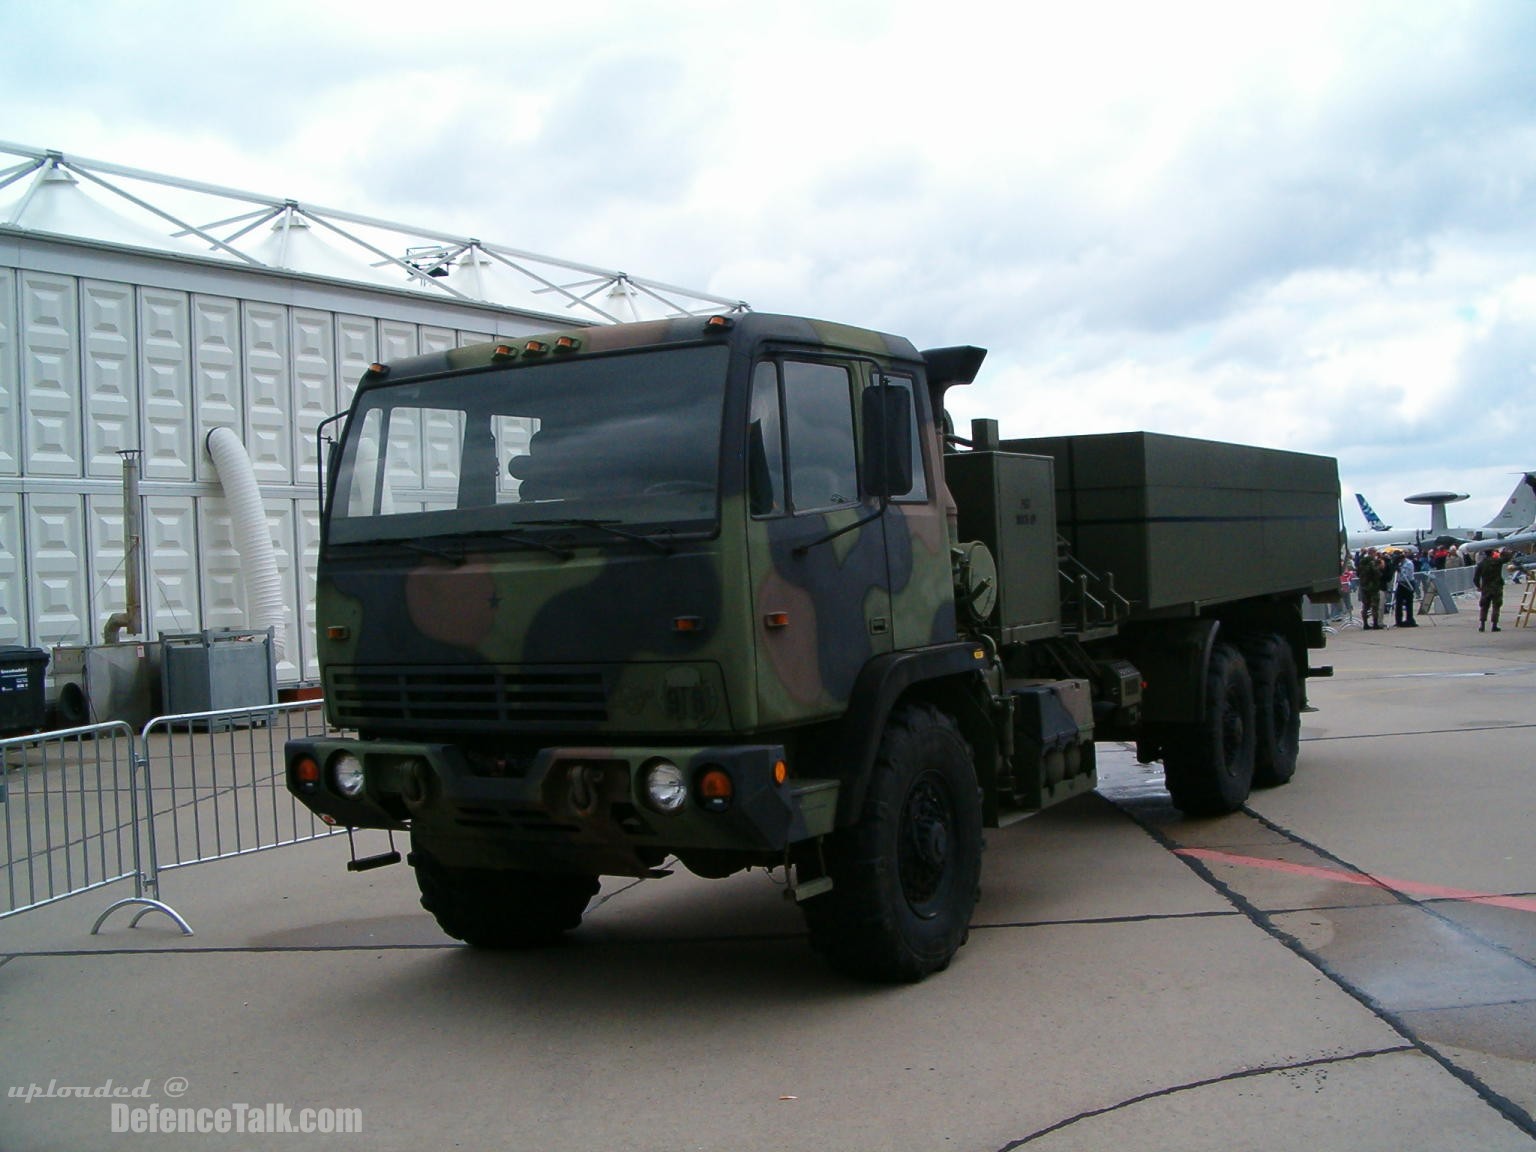 US Army Truck at the ILA2006 Air Show